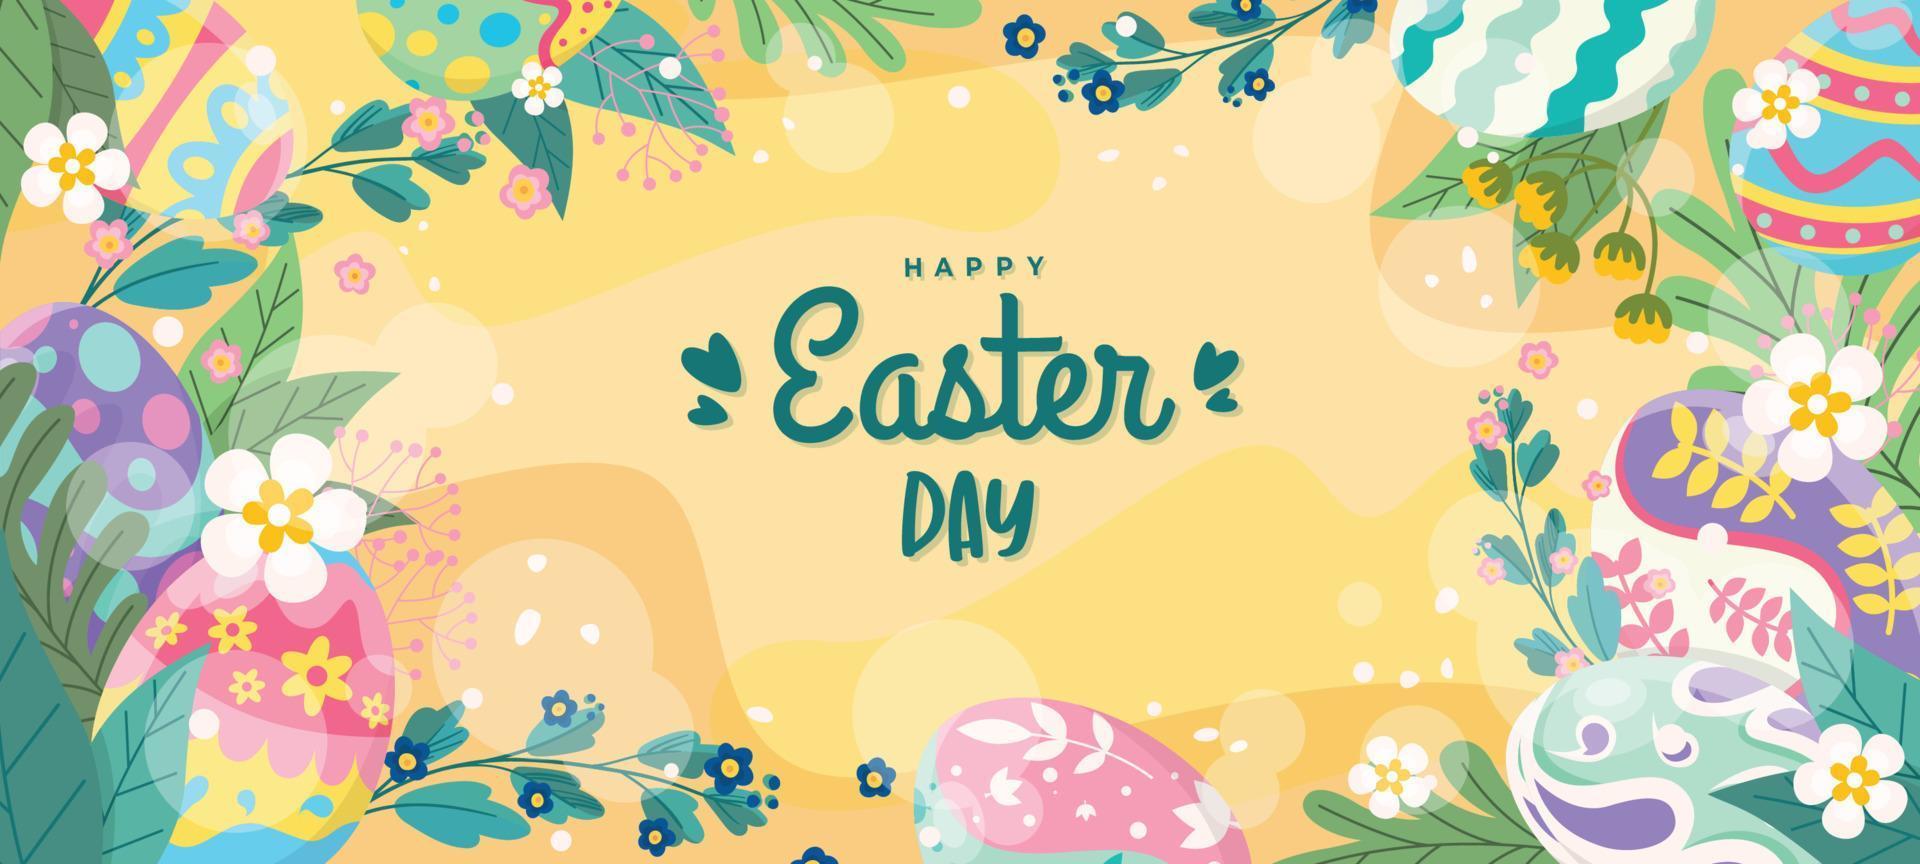 Easter Egg Template with Floral Theme vector